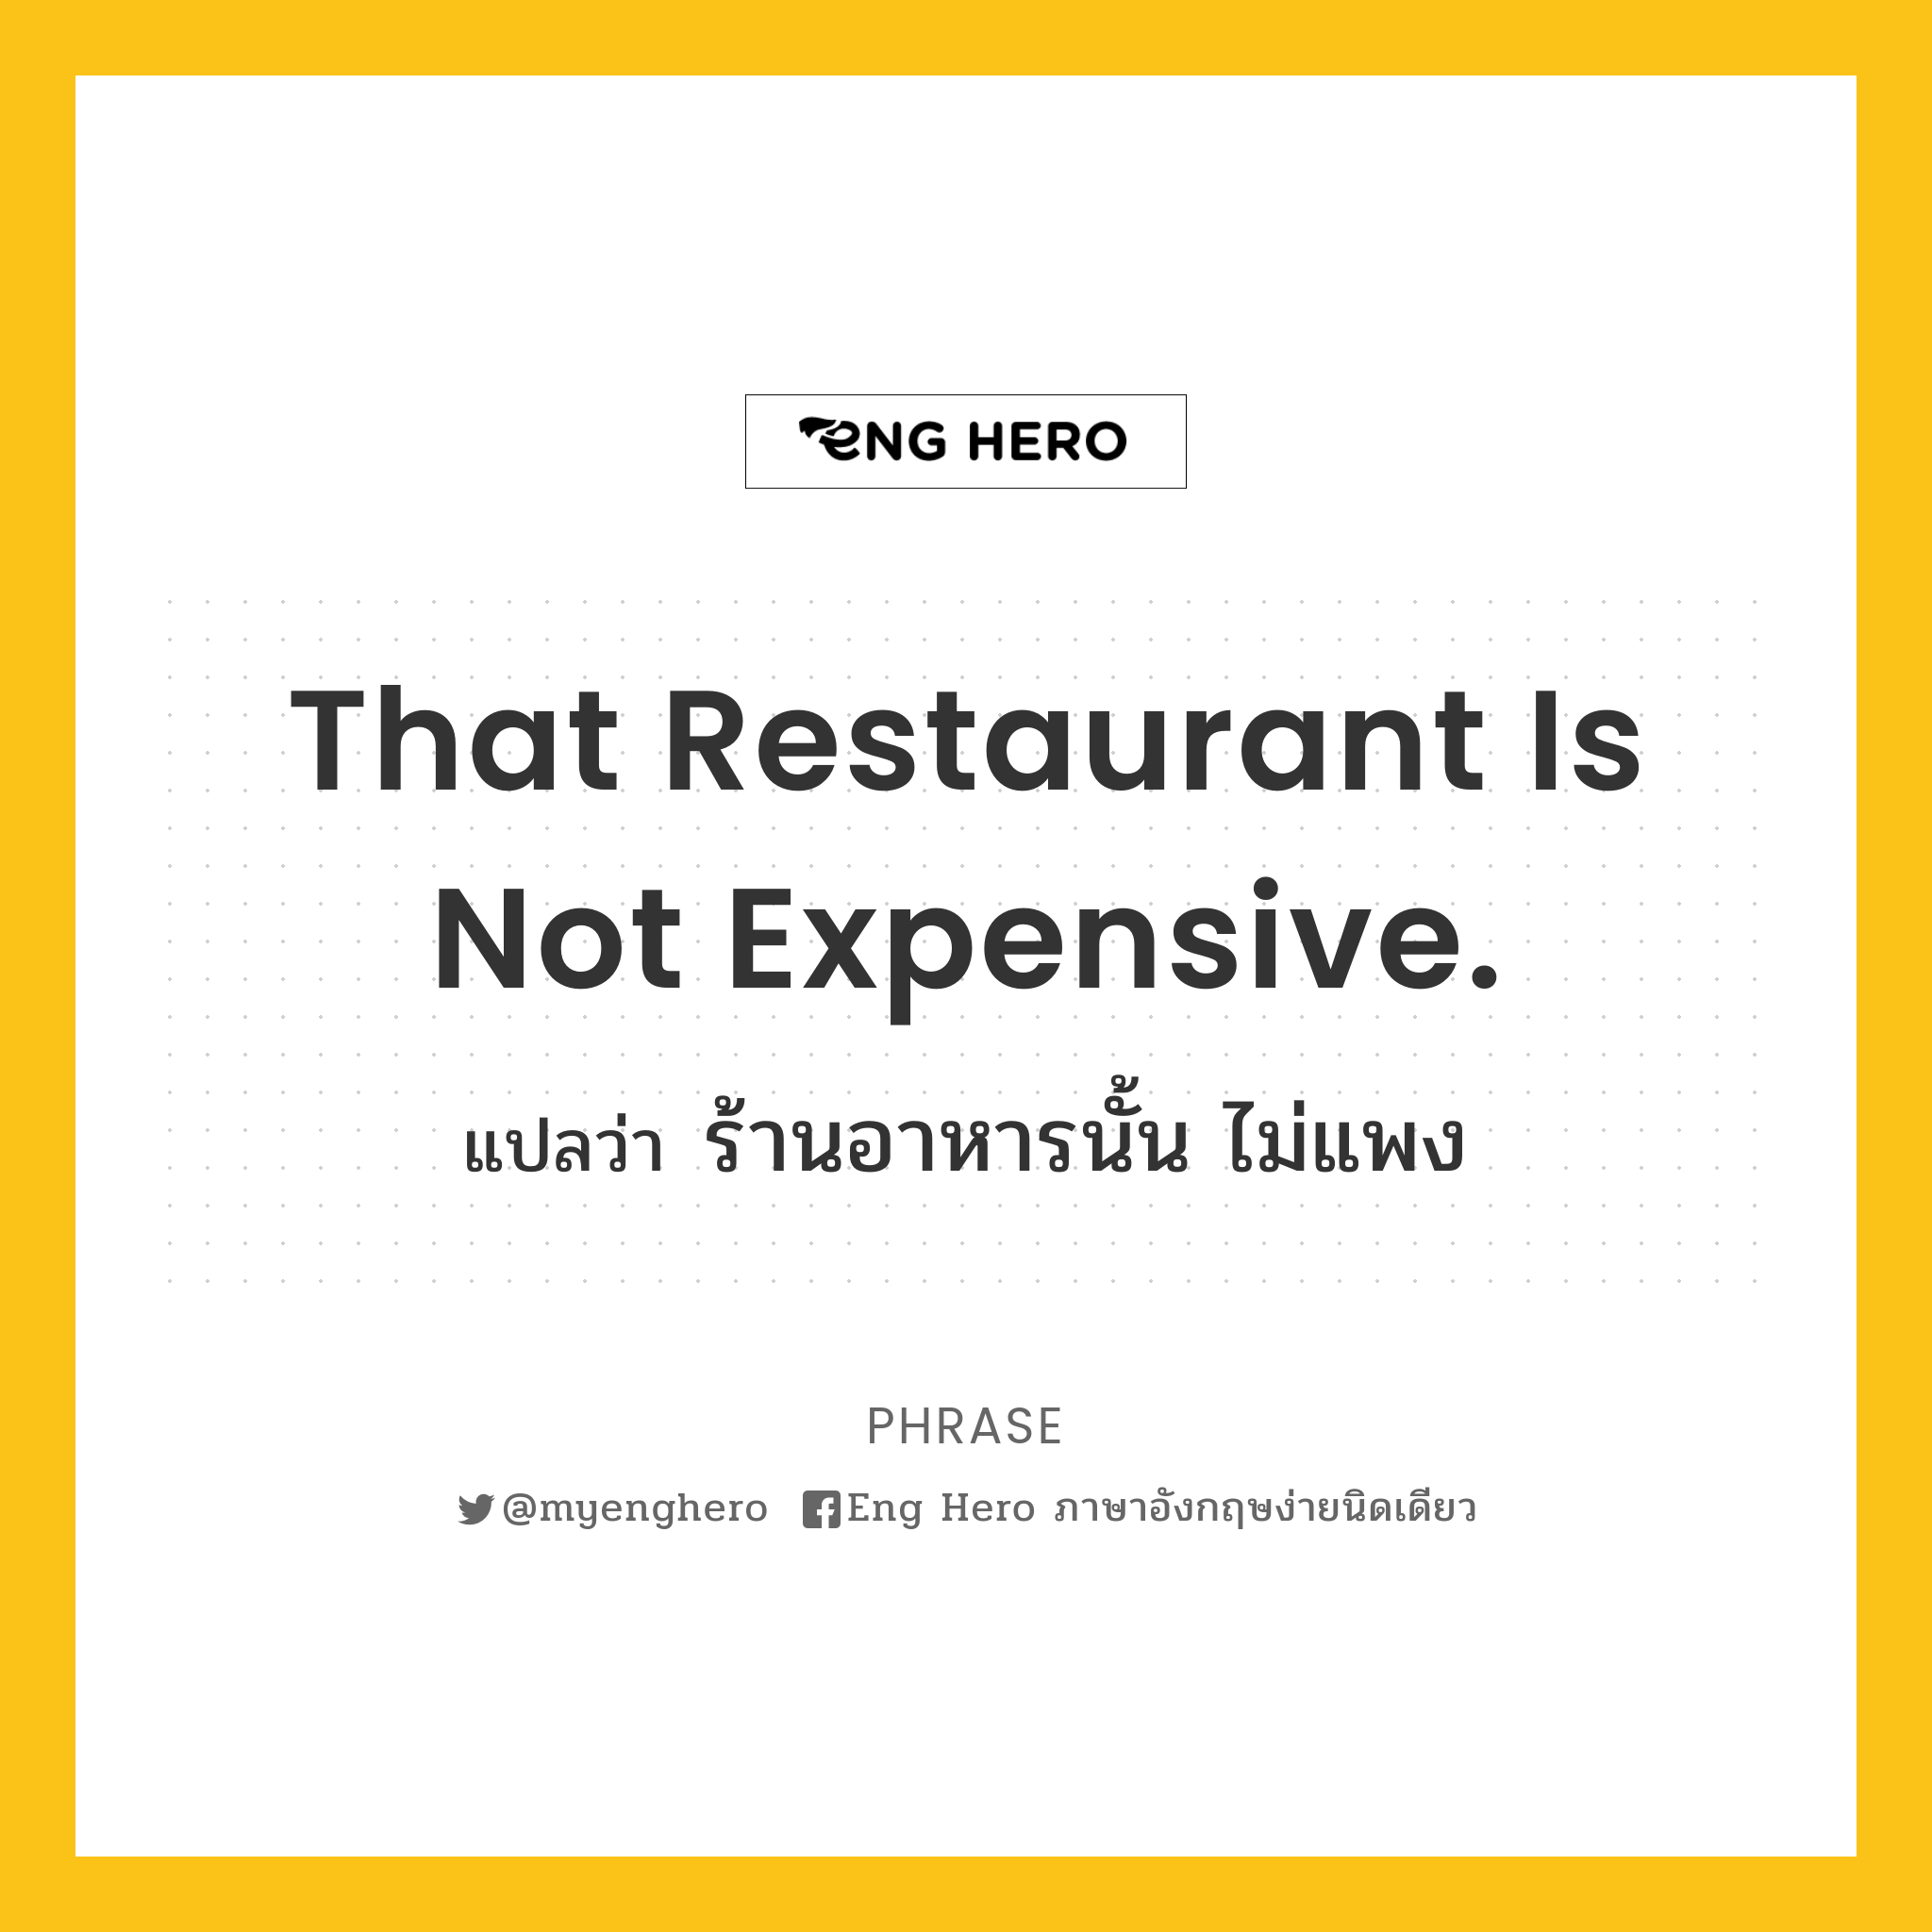 That restaurant is not expensive.